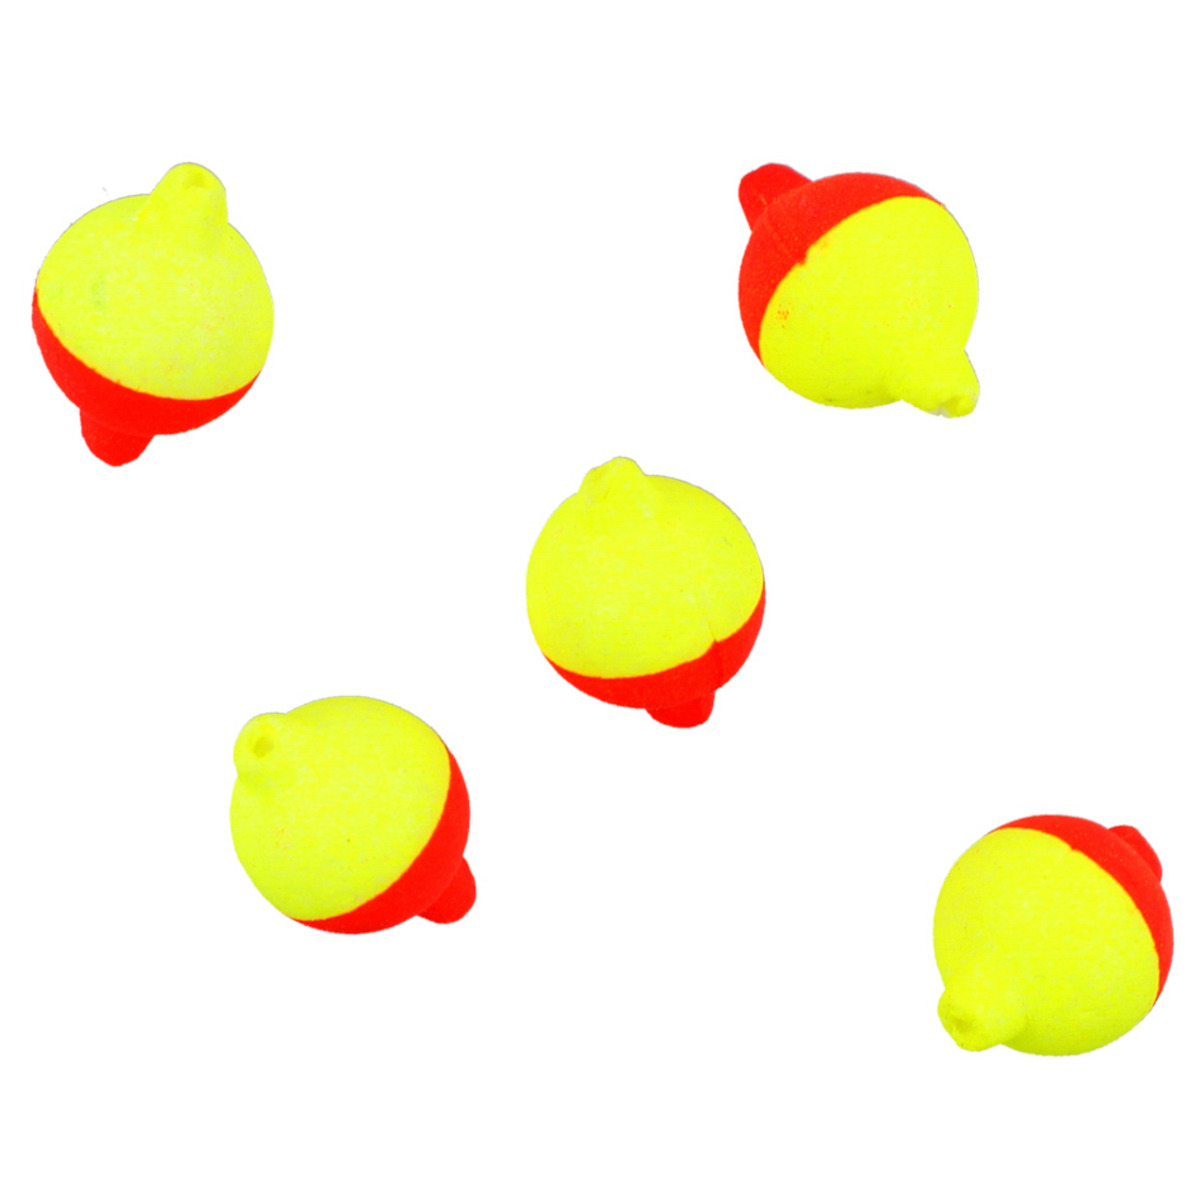 Mikado Surfcasting Ballsfloating Diameter - 13mm  RED AND YELLOW